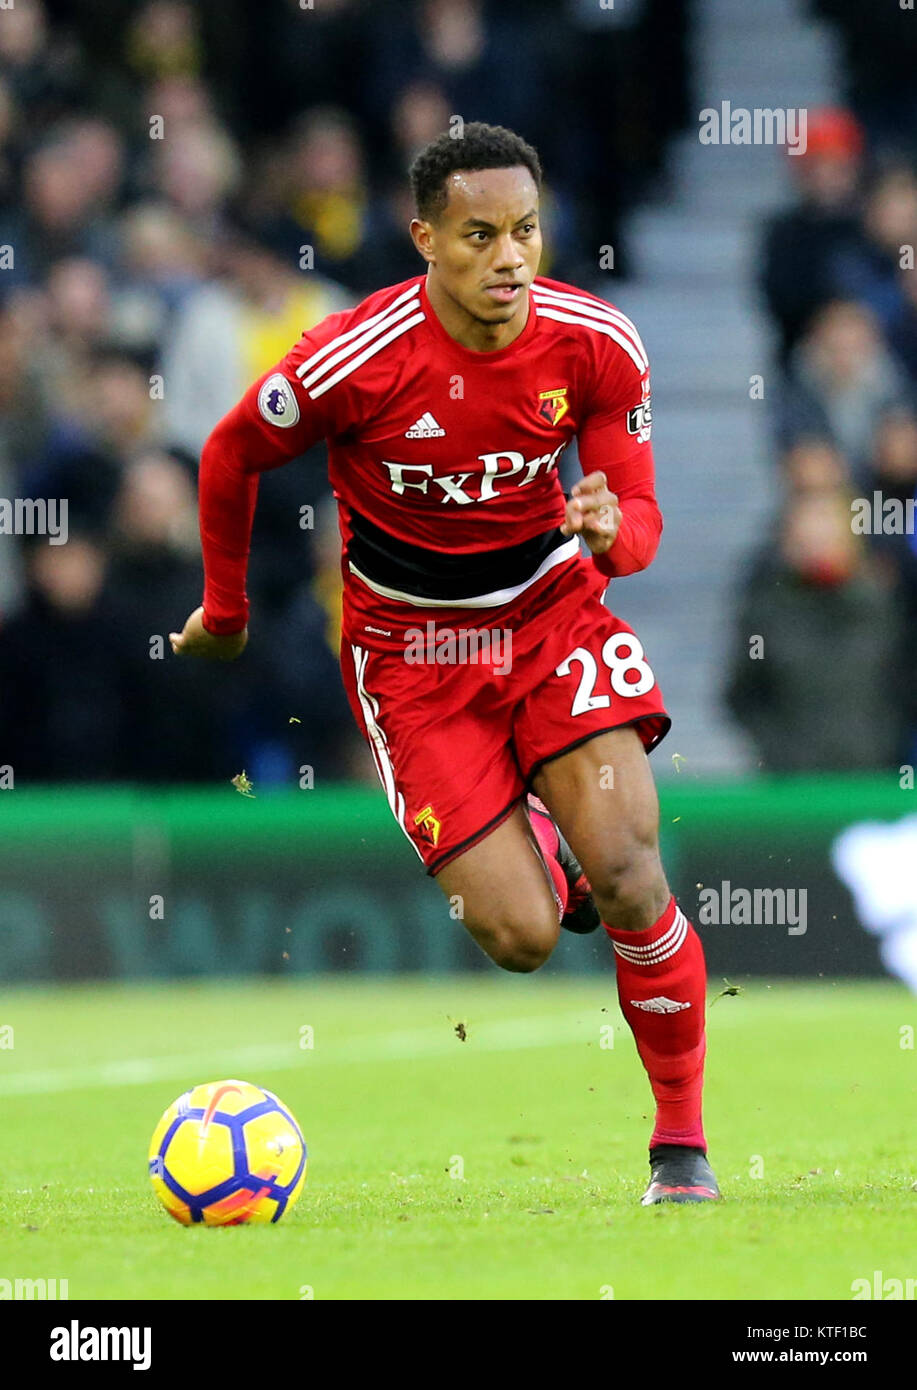 Watford's Andre Carrillo during the Premier League match at the AMEX Stadium, Brighton. PRESS ASSOCIATION Photo. Picture date: Saturday December 23, 2017. See PA story SOCCER Brighton. Photo credit should read: Gareth Fuller/PA Wire. RESTRICTIONS: No use with unauthorised audio, video, data, fixture lists, club/league logos or 'live' services. Online in-match use limited to 75 images, no video emulation. No use in betting, games or single club/league/player publications Stock Photo